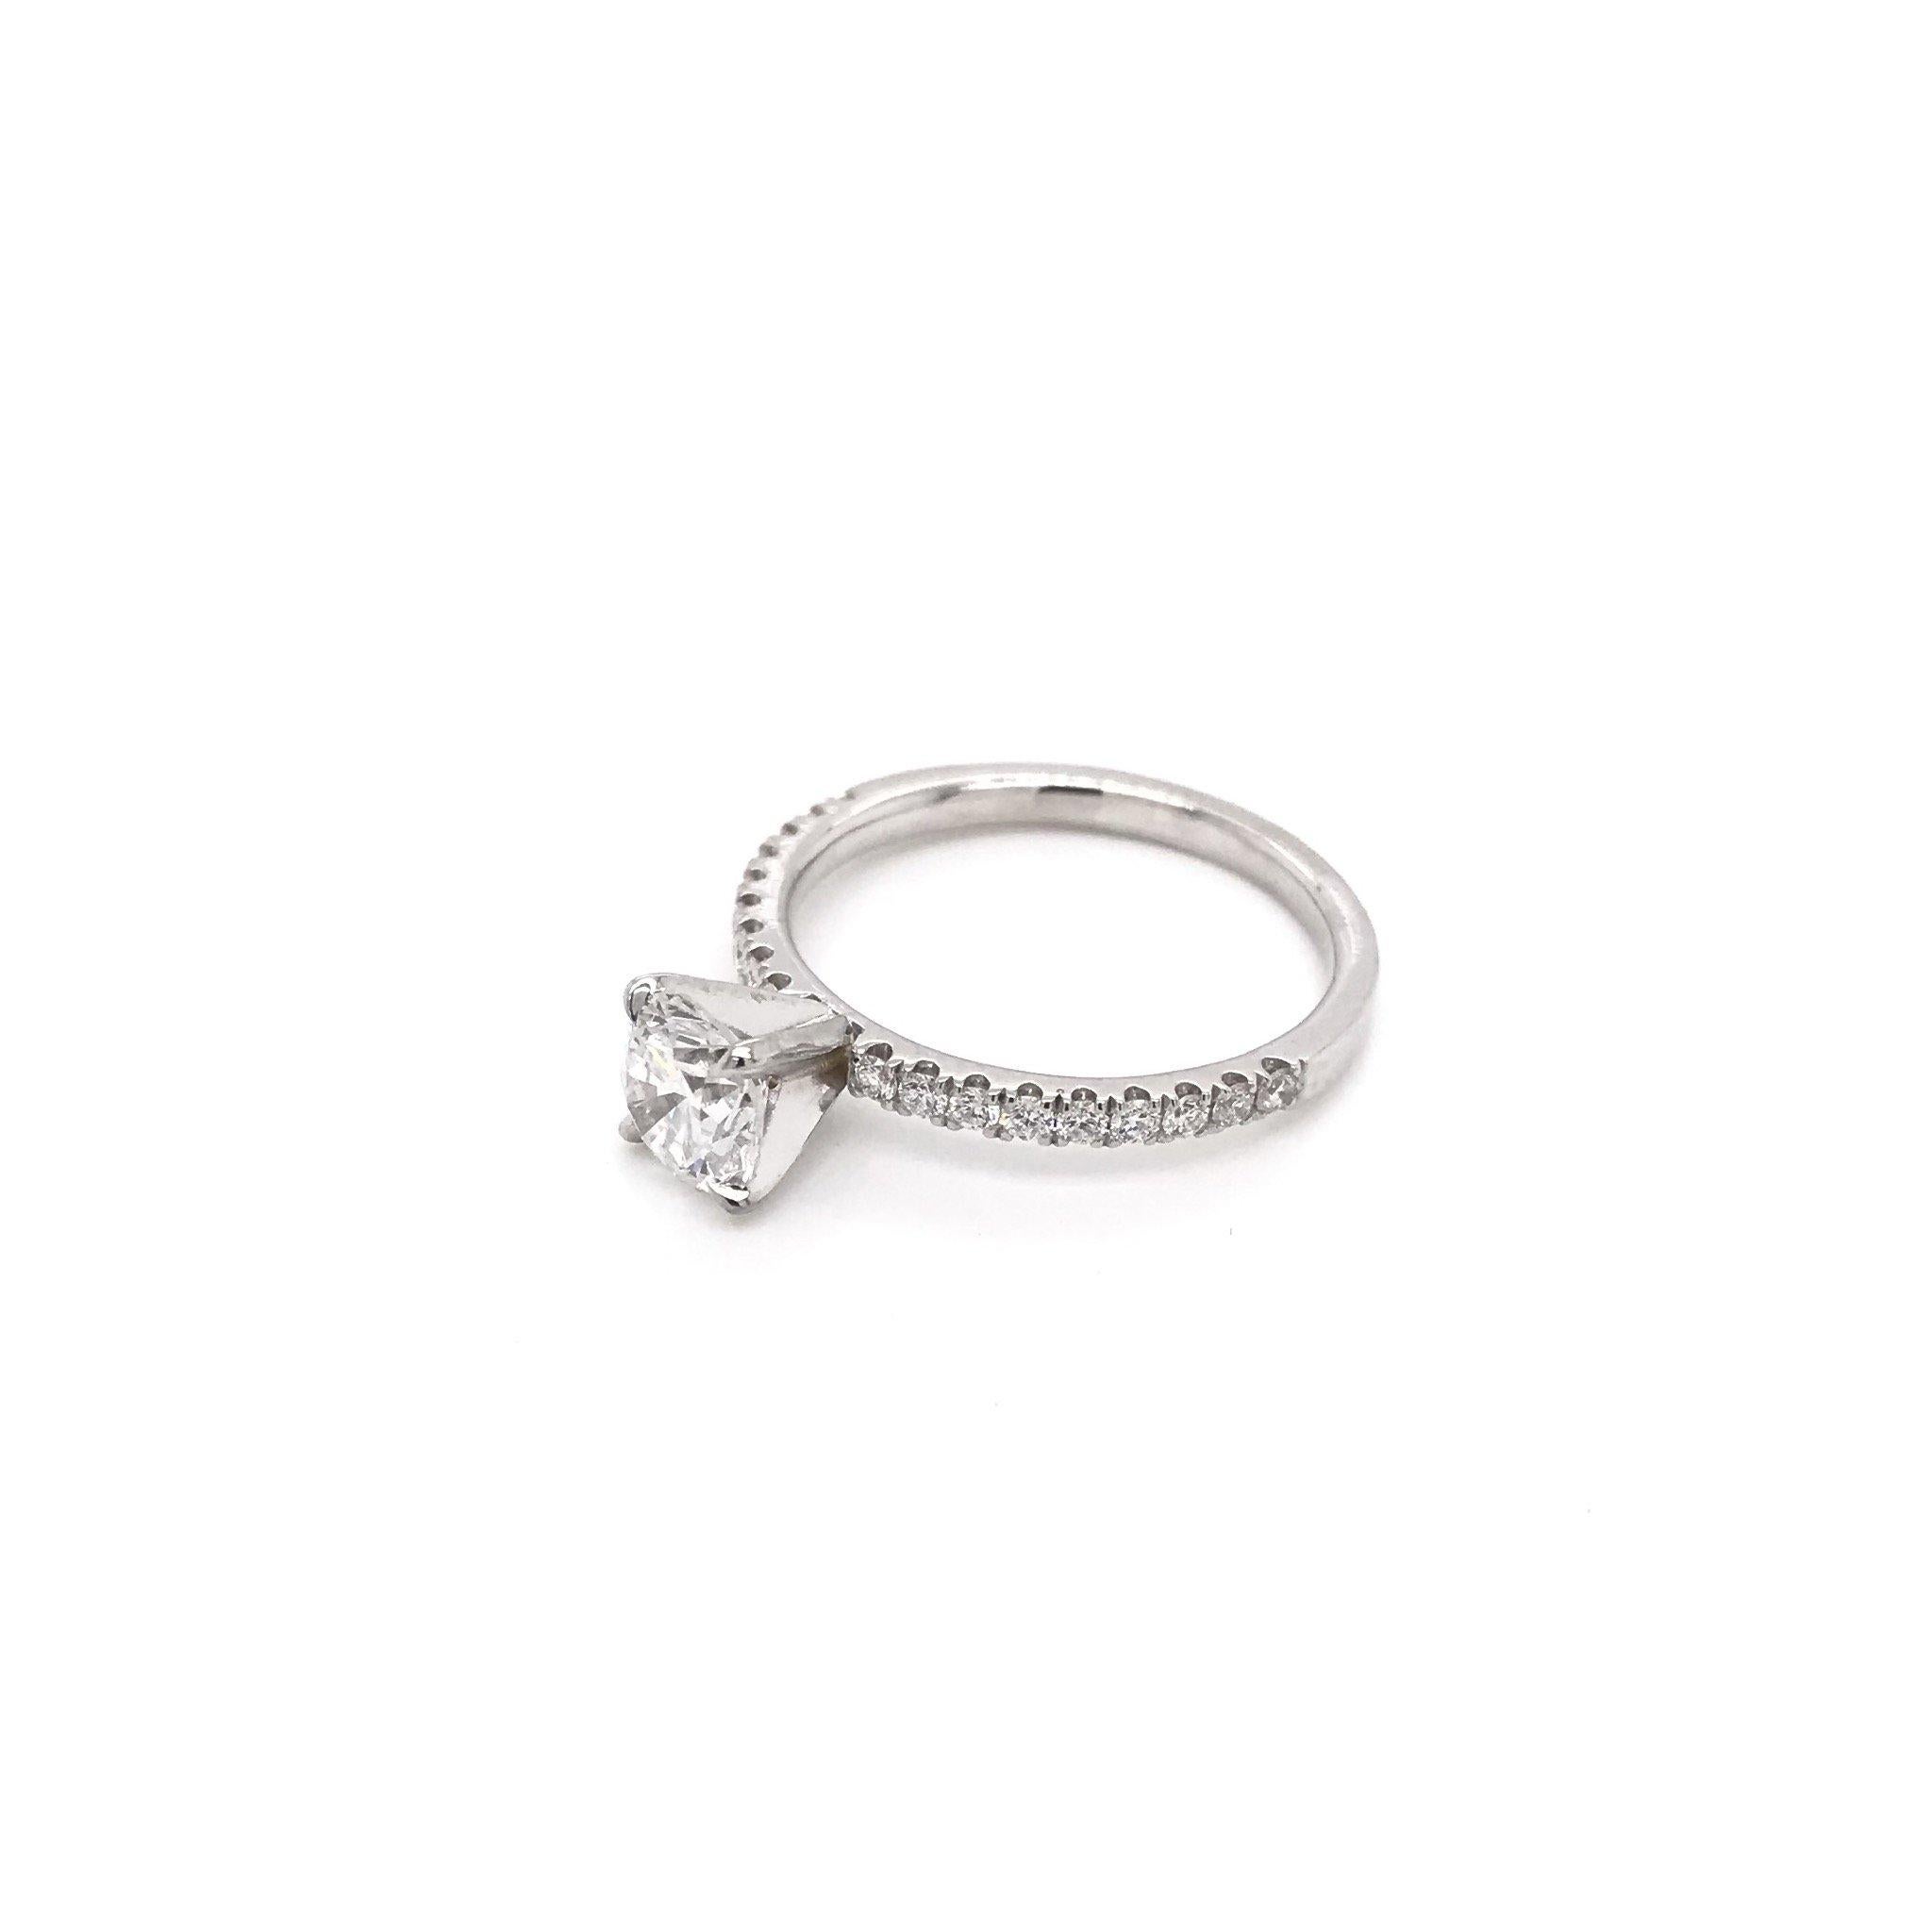 A contemporary style, this diamond ring is new. The 14k white gold setting features a beautiful 0.97 carat round diamond. The diamond grades approximately F in color, VS2 in clarity. This diamond has been certified by the Gemological Institute of